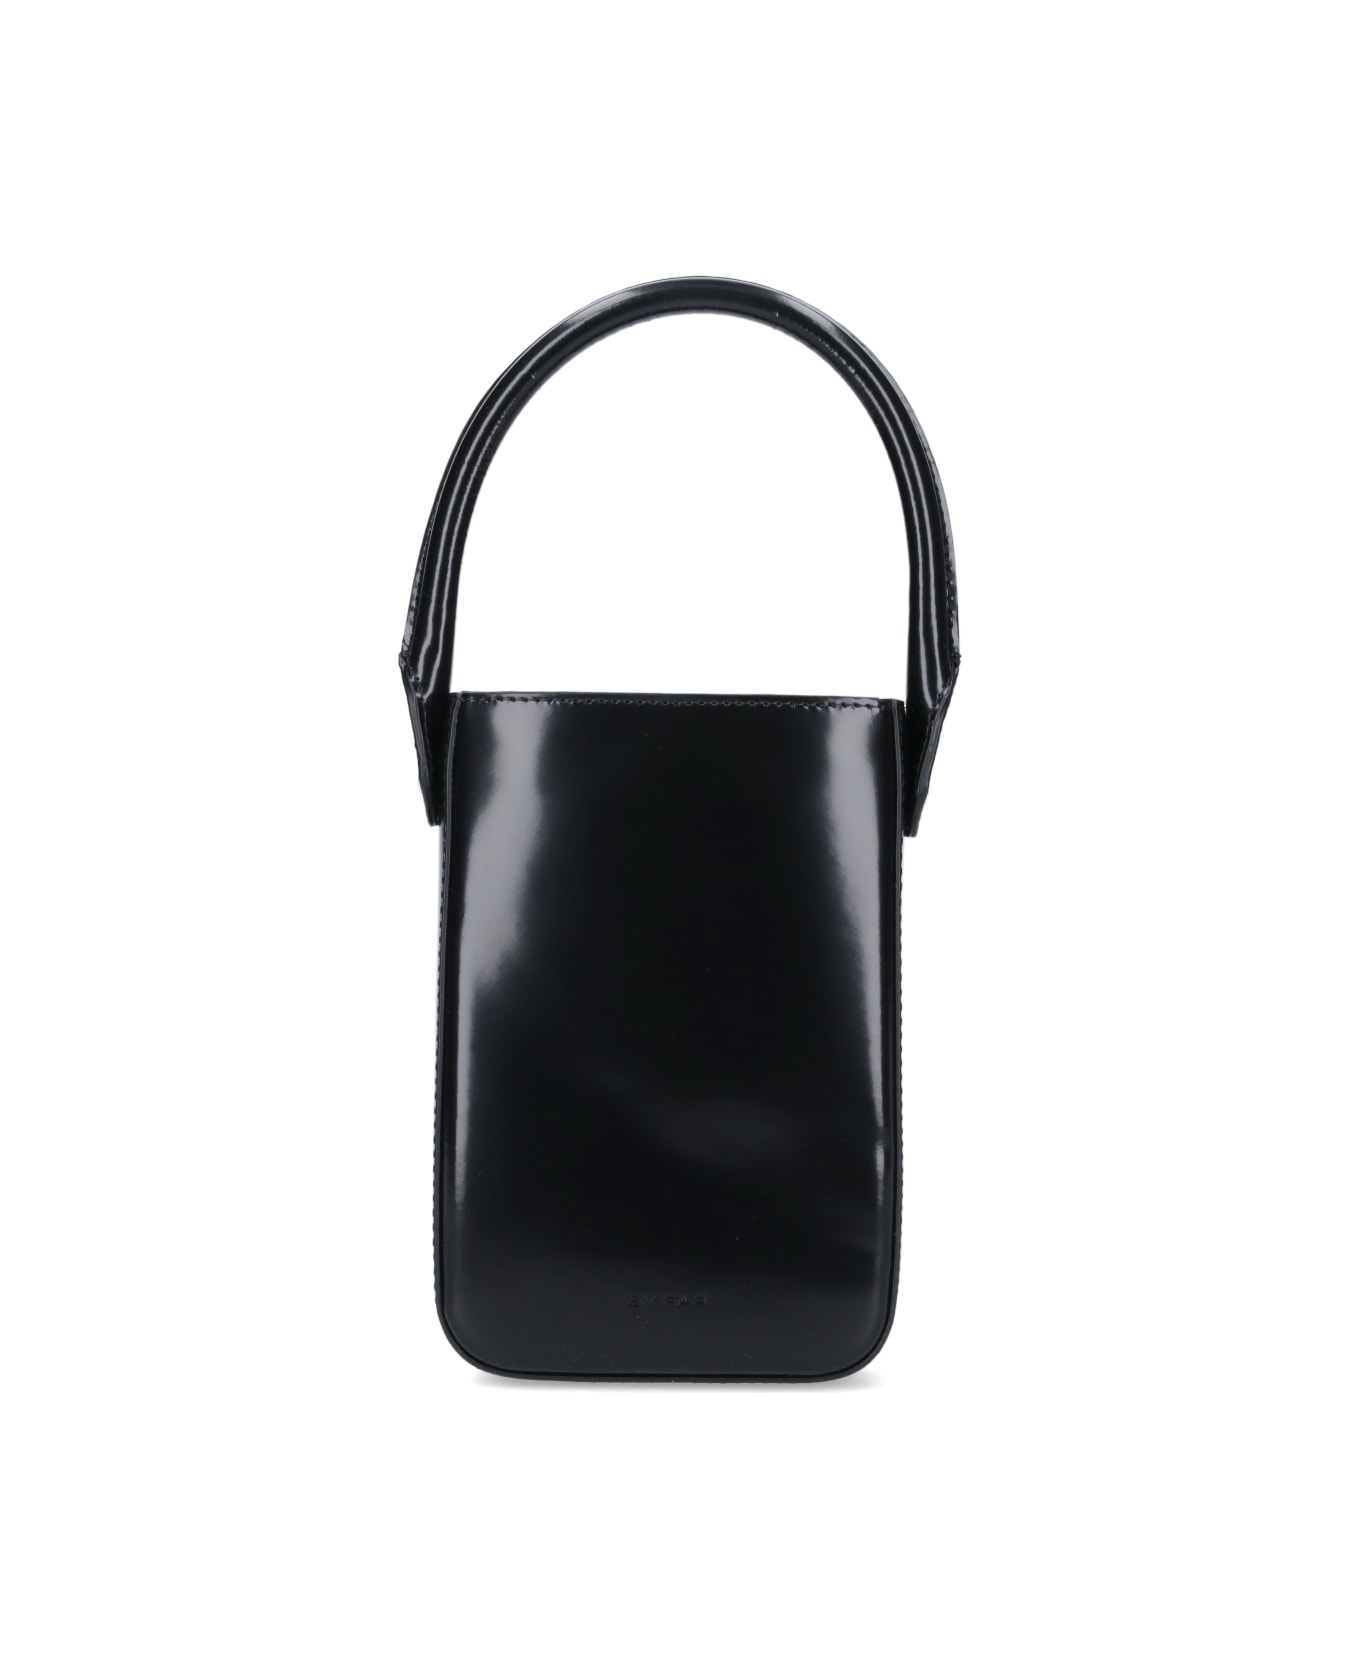 BY FAR Mini Tote Bag "the Note" - Black   トートバッグ